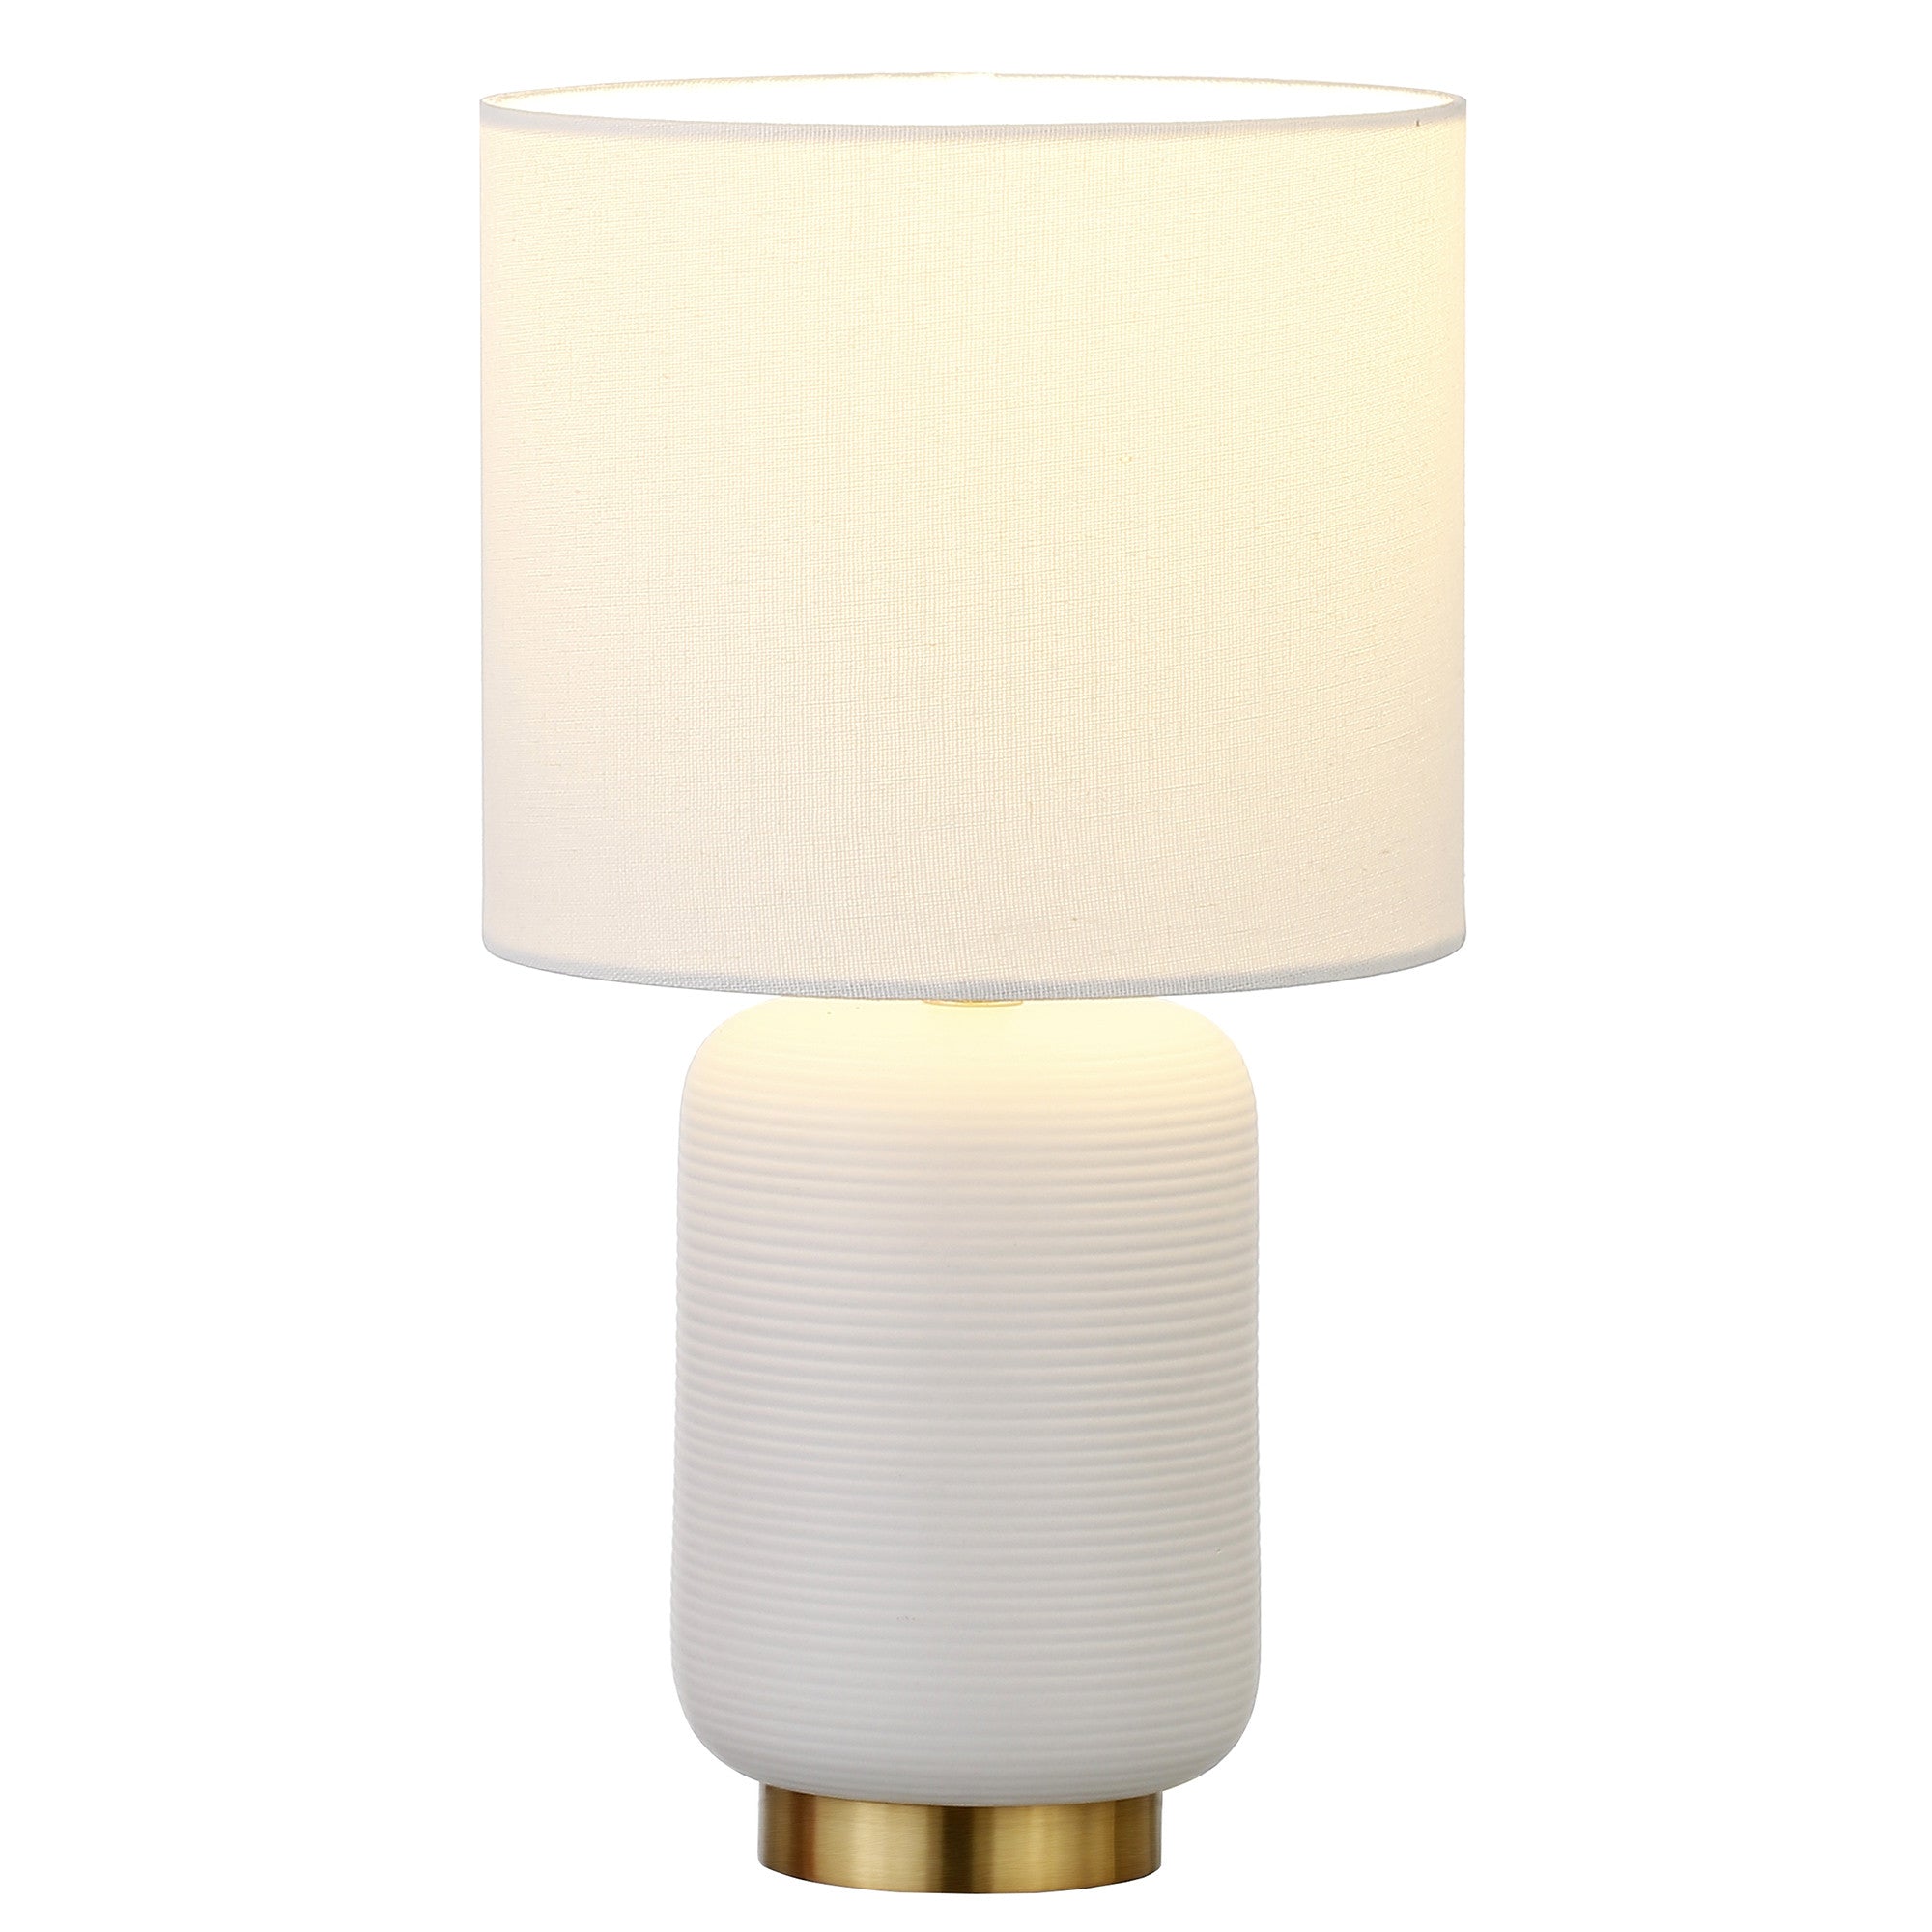 15" Gold and White Ceramic Cylinder Table Lamp With White Drum Shade